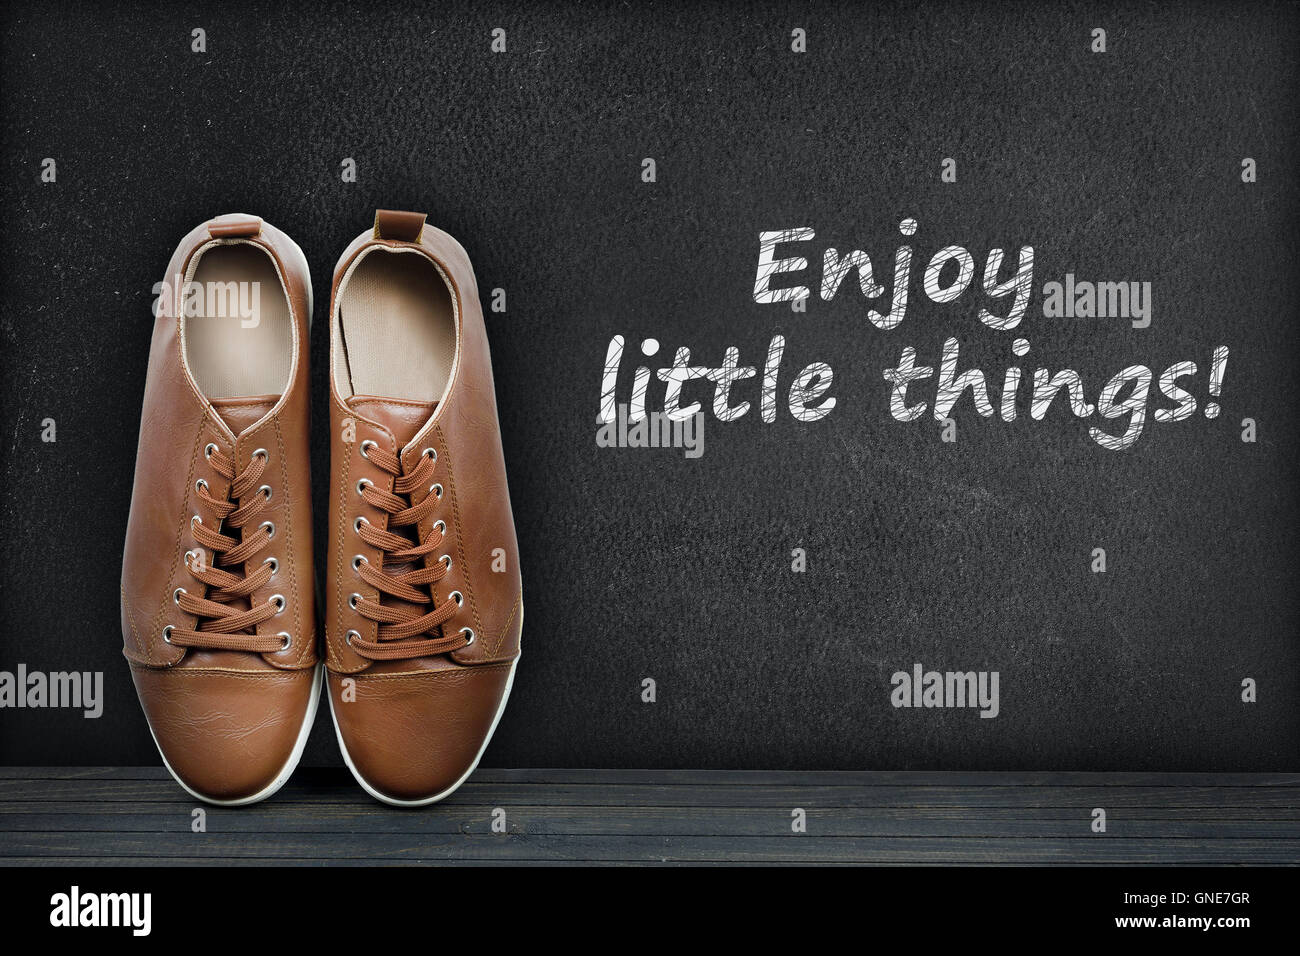 Enjoy little things text on black board and shoes Stock Photo